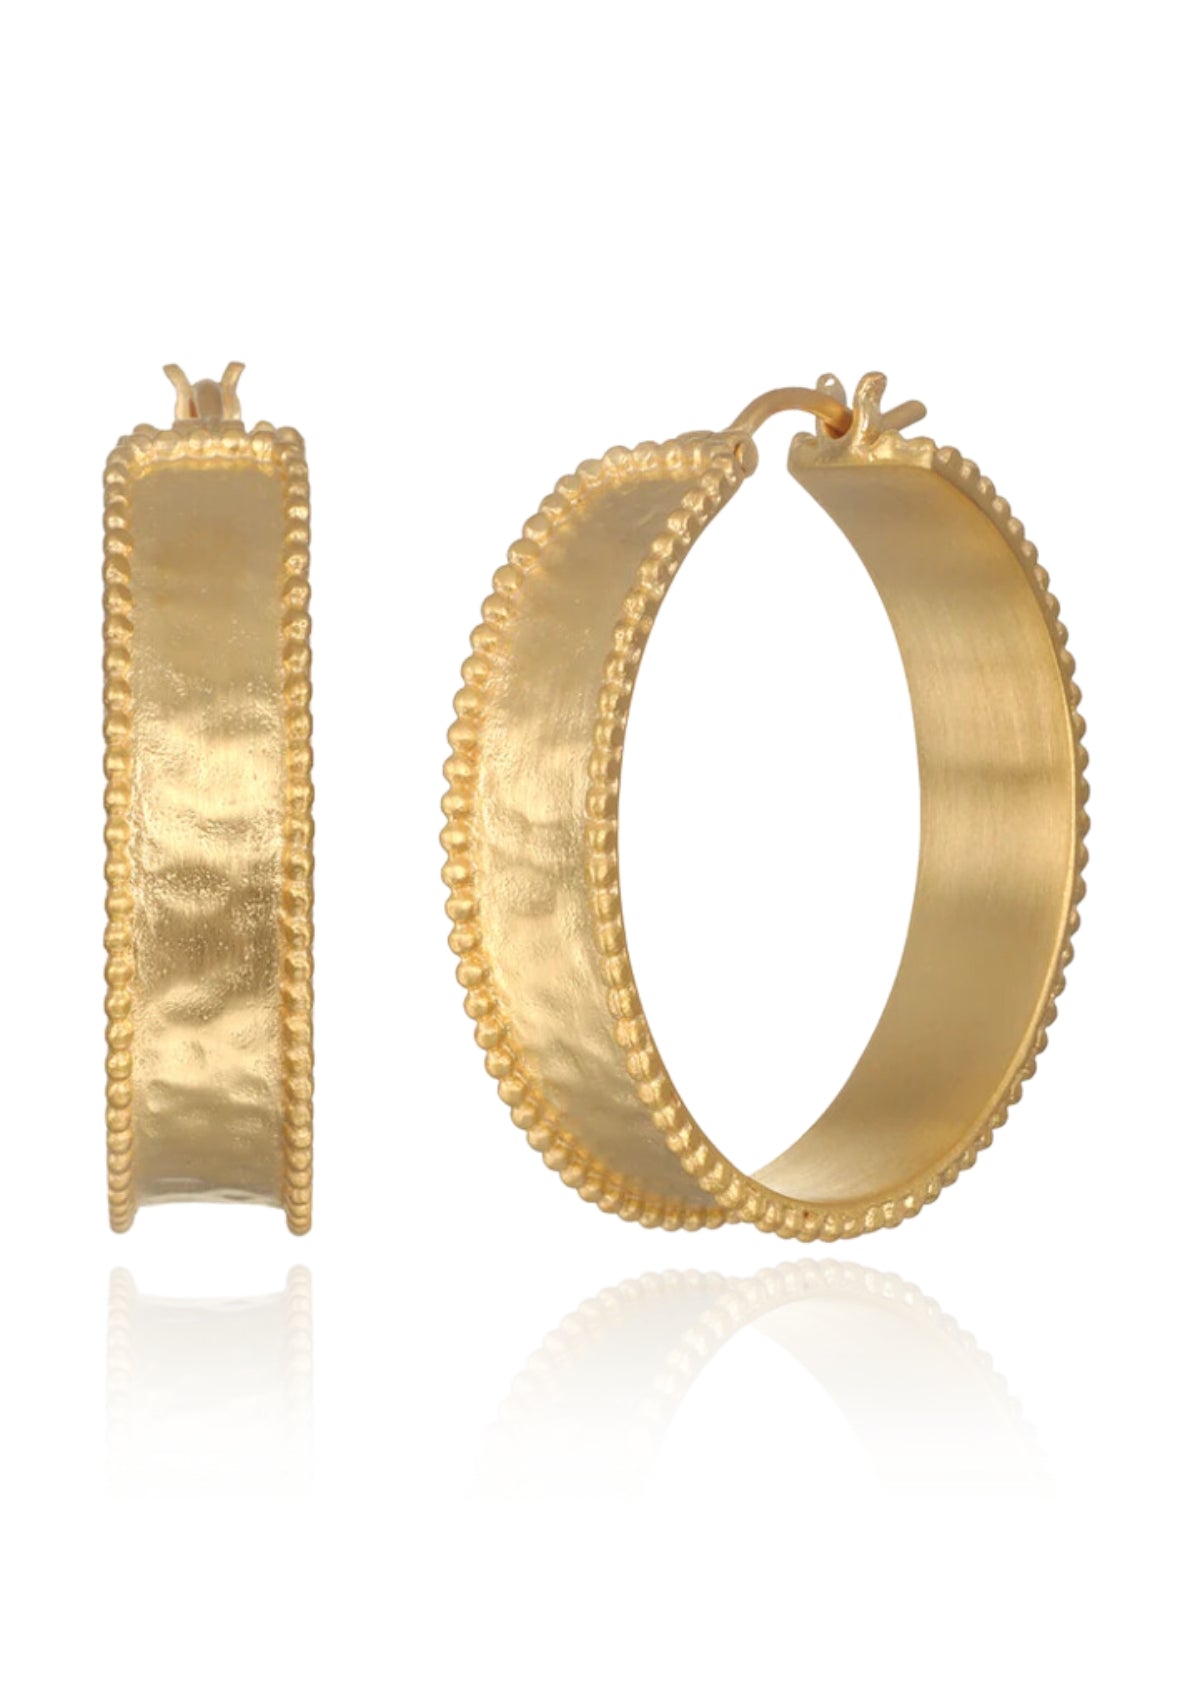 Large gold hoop earrings with latch back closure. Beads on trim of hoops.